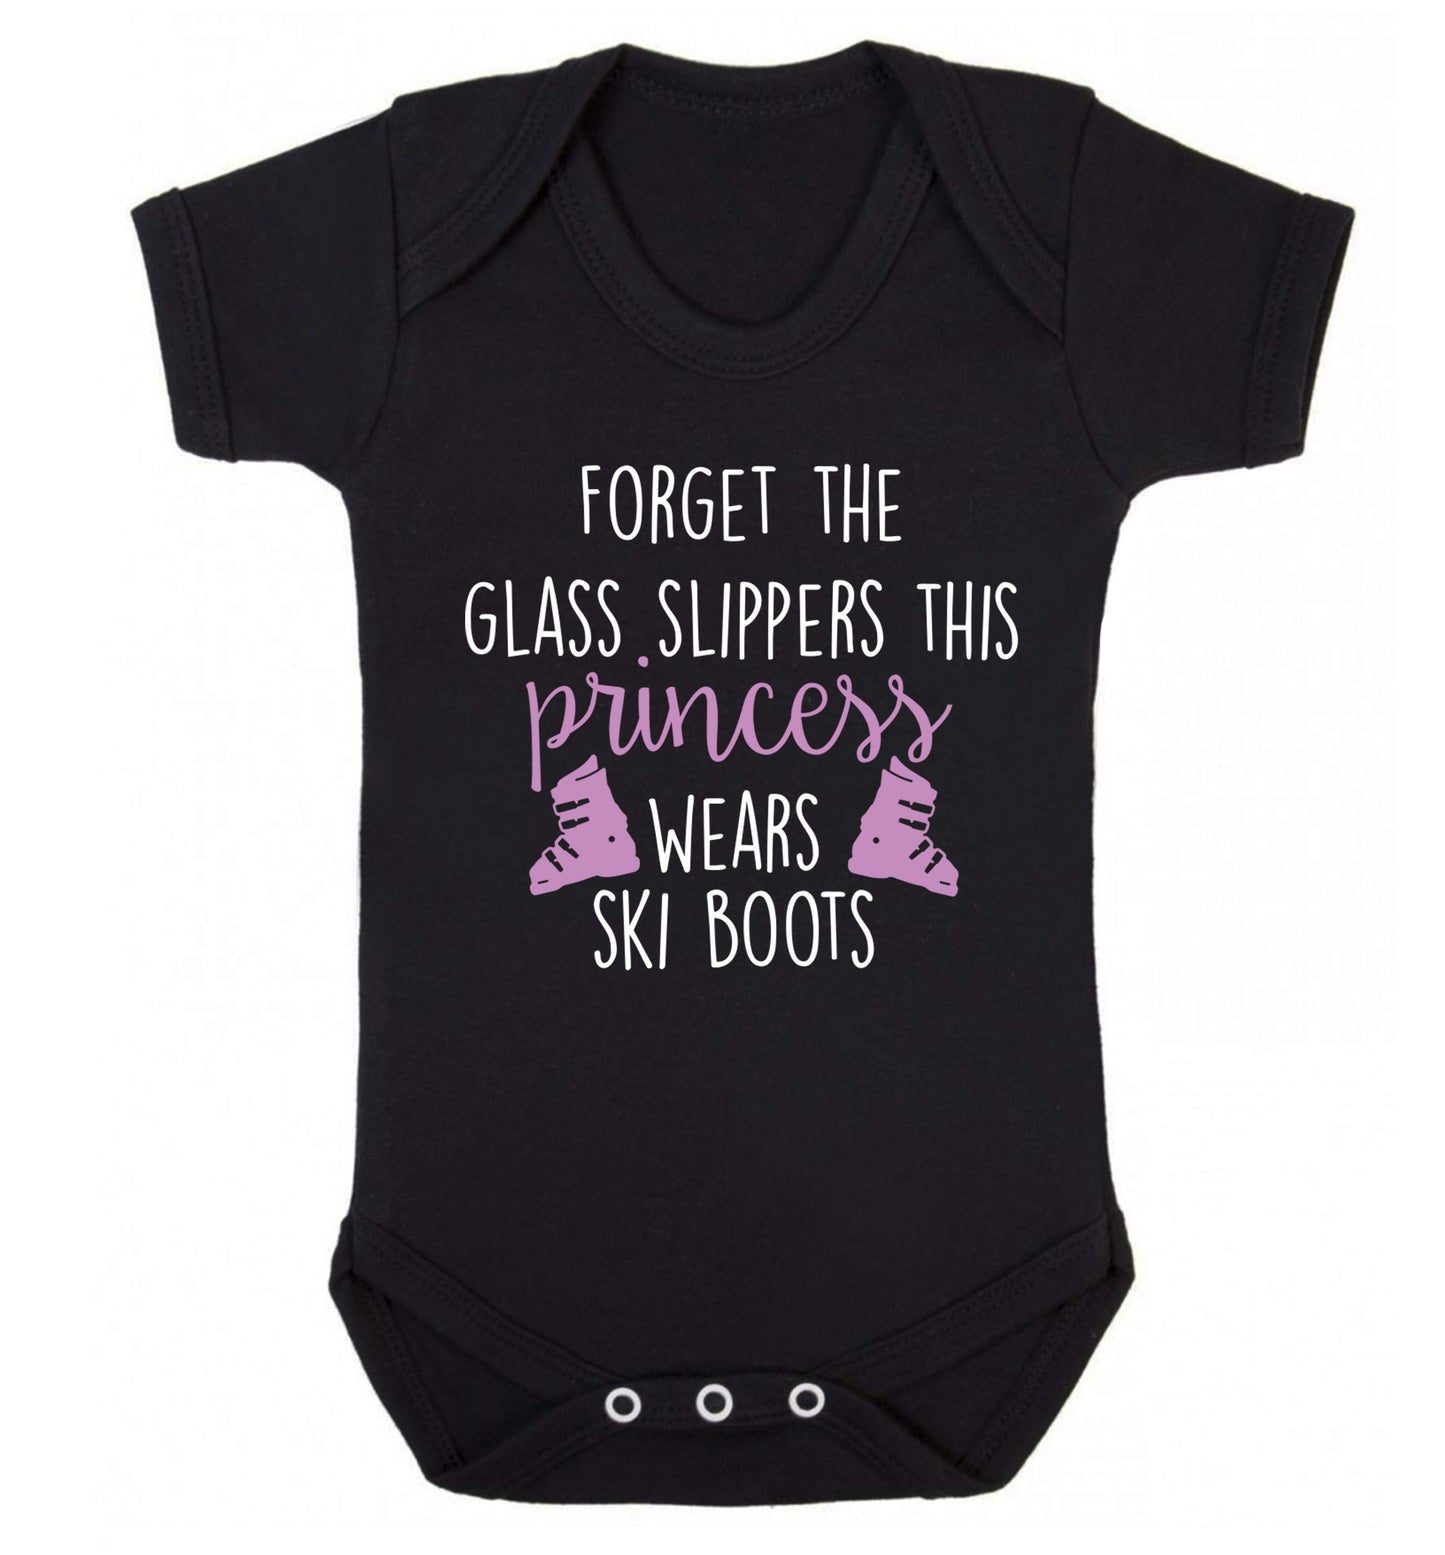 Forget the glass slippers this princess wears ski boots Baby Vest black 18-24 months